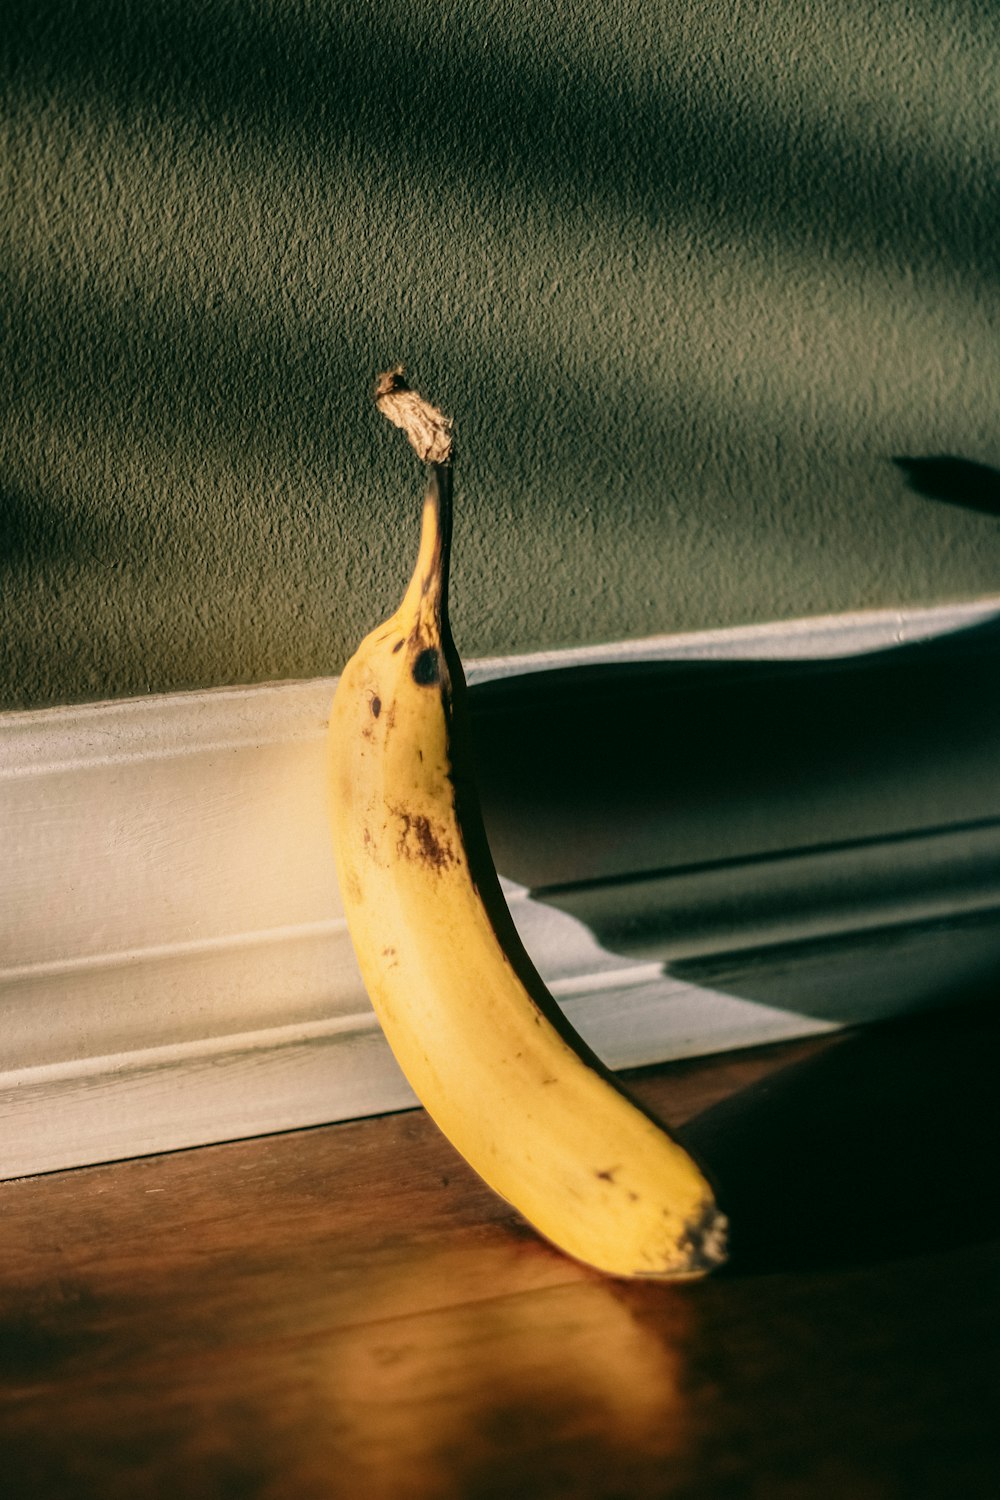 a banana sitting on the floor in front of a window